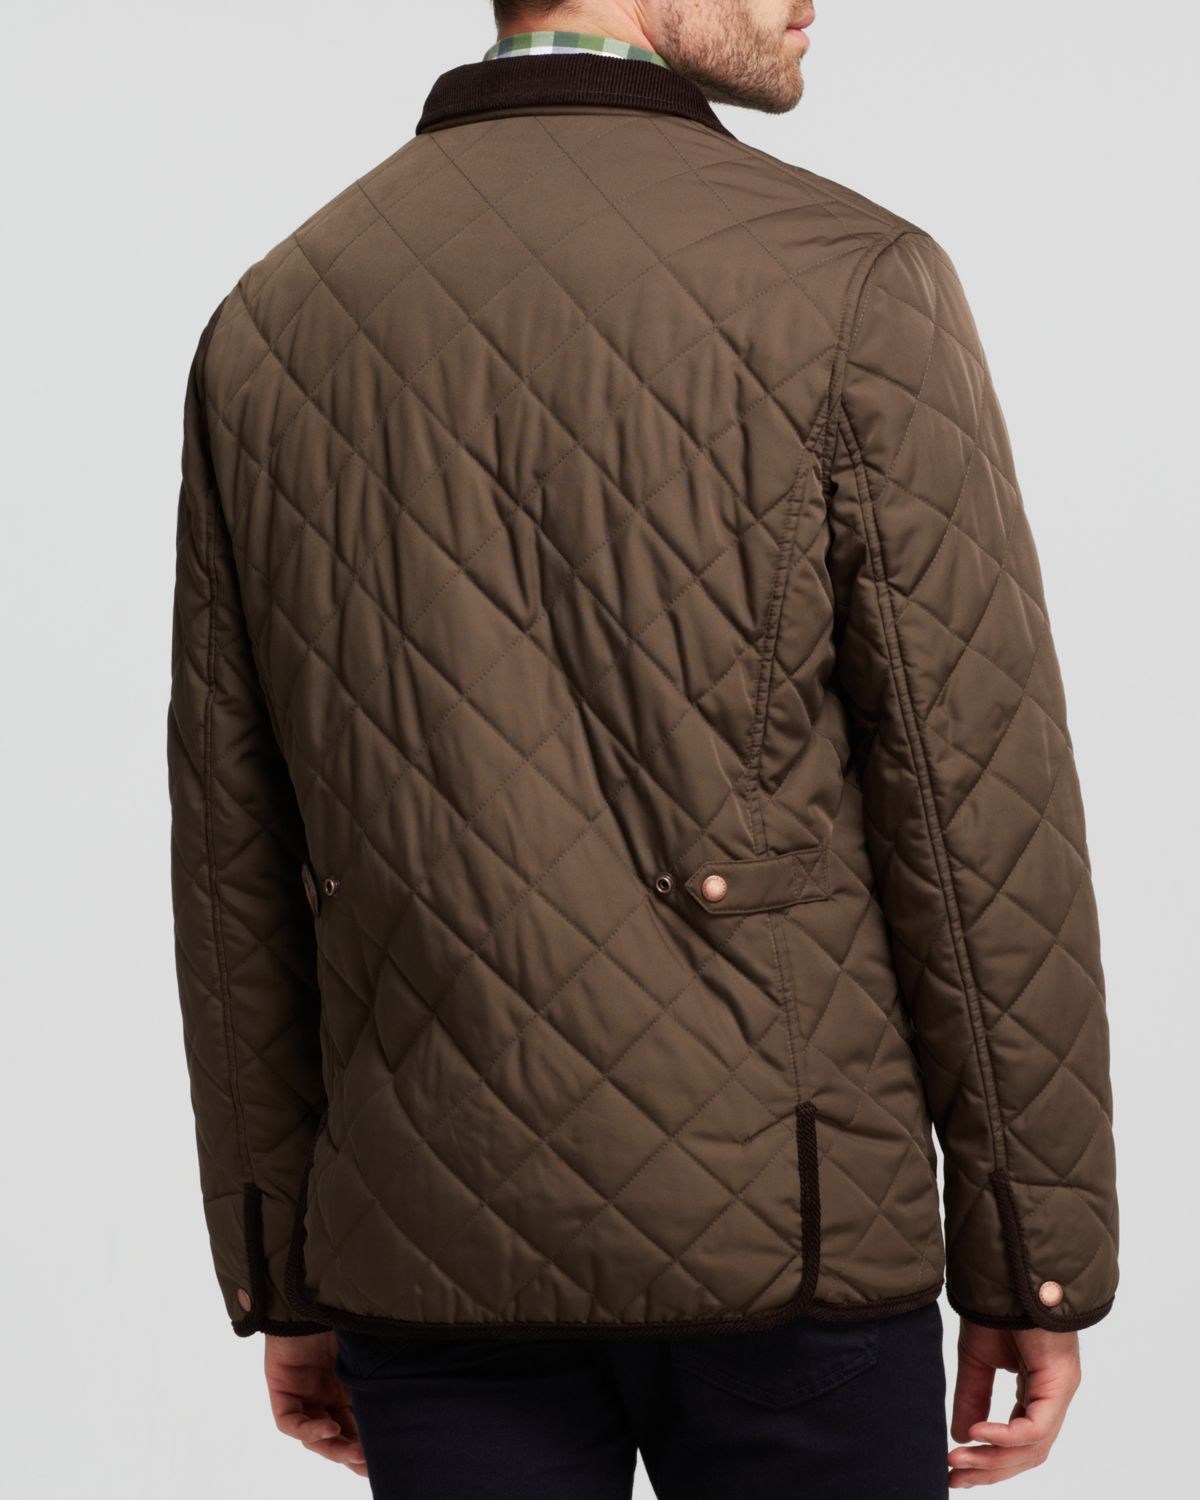 Cole Haan Quilted Barn Jacket in Brown for Men - Lyst